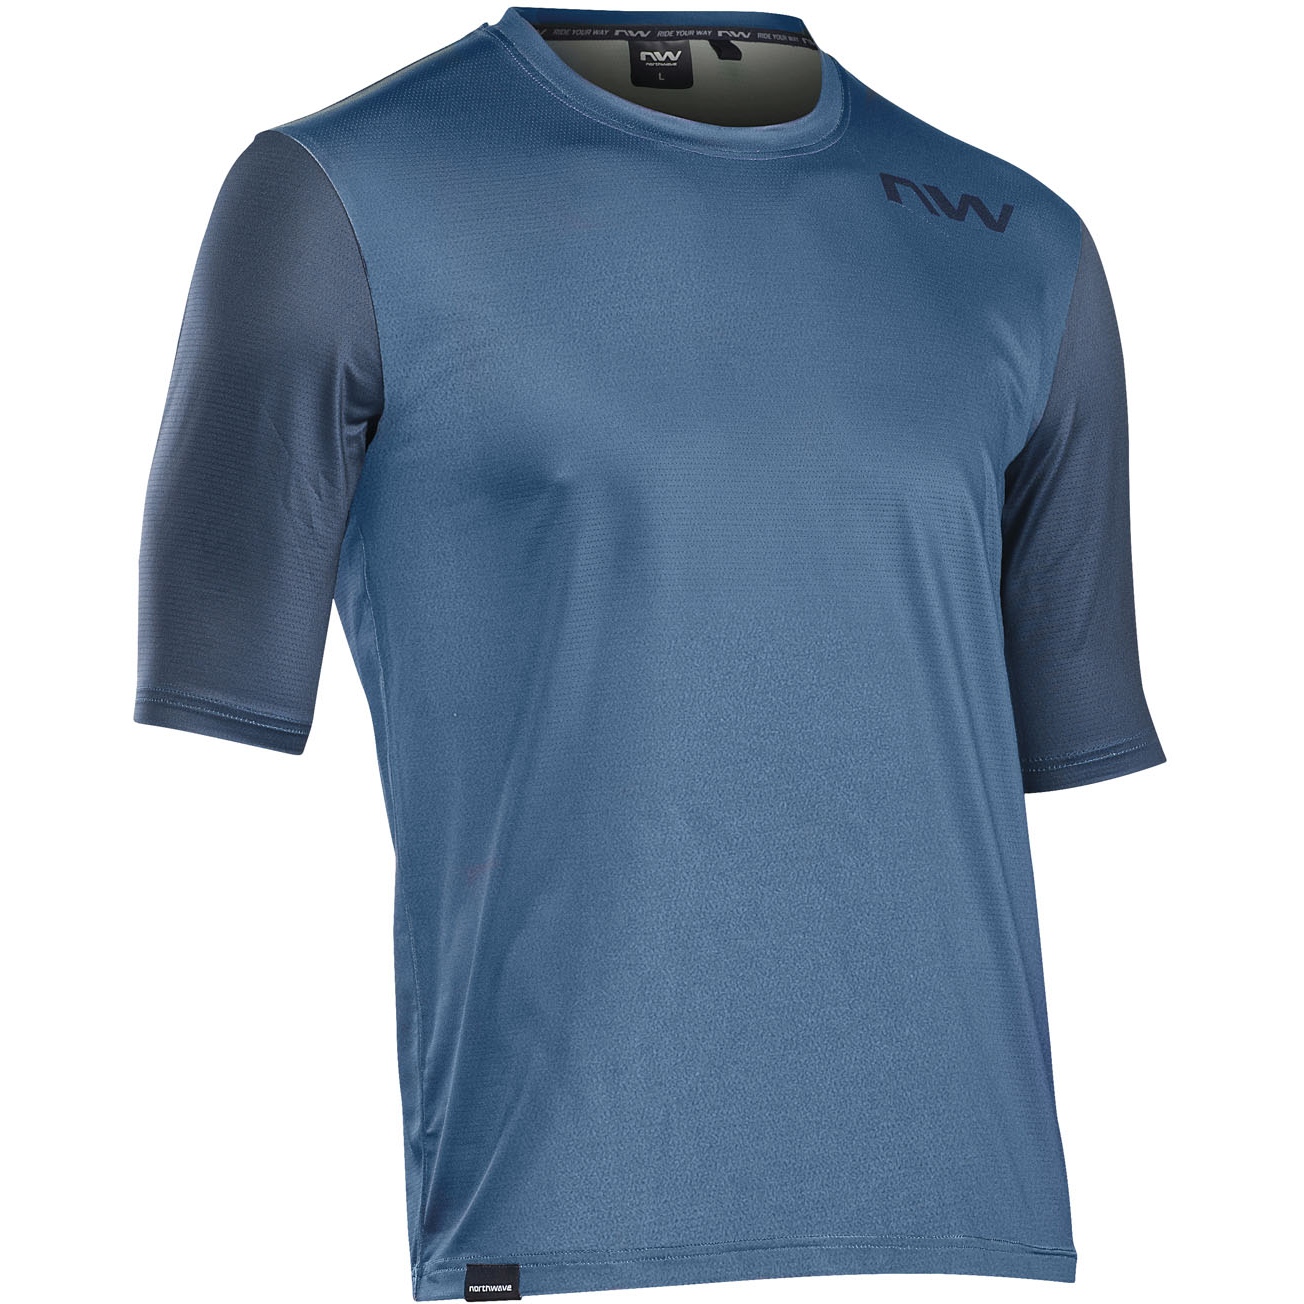 Picture of Northwave Xtrail 2 Shortsleeve Jersey Men - deep blue 21